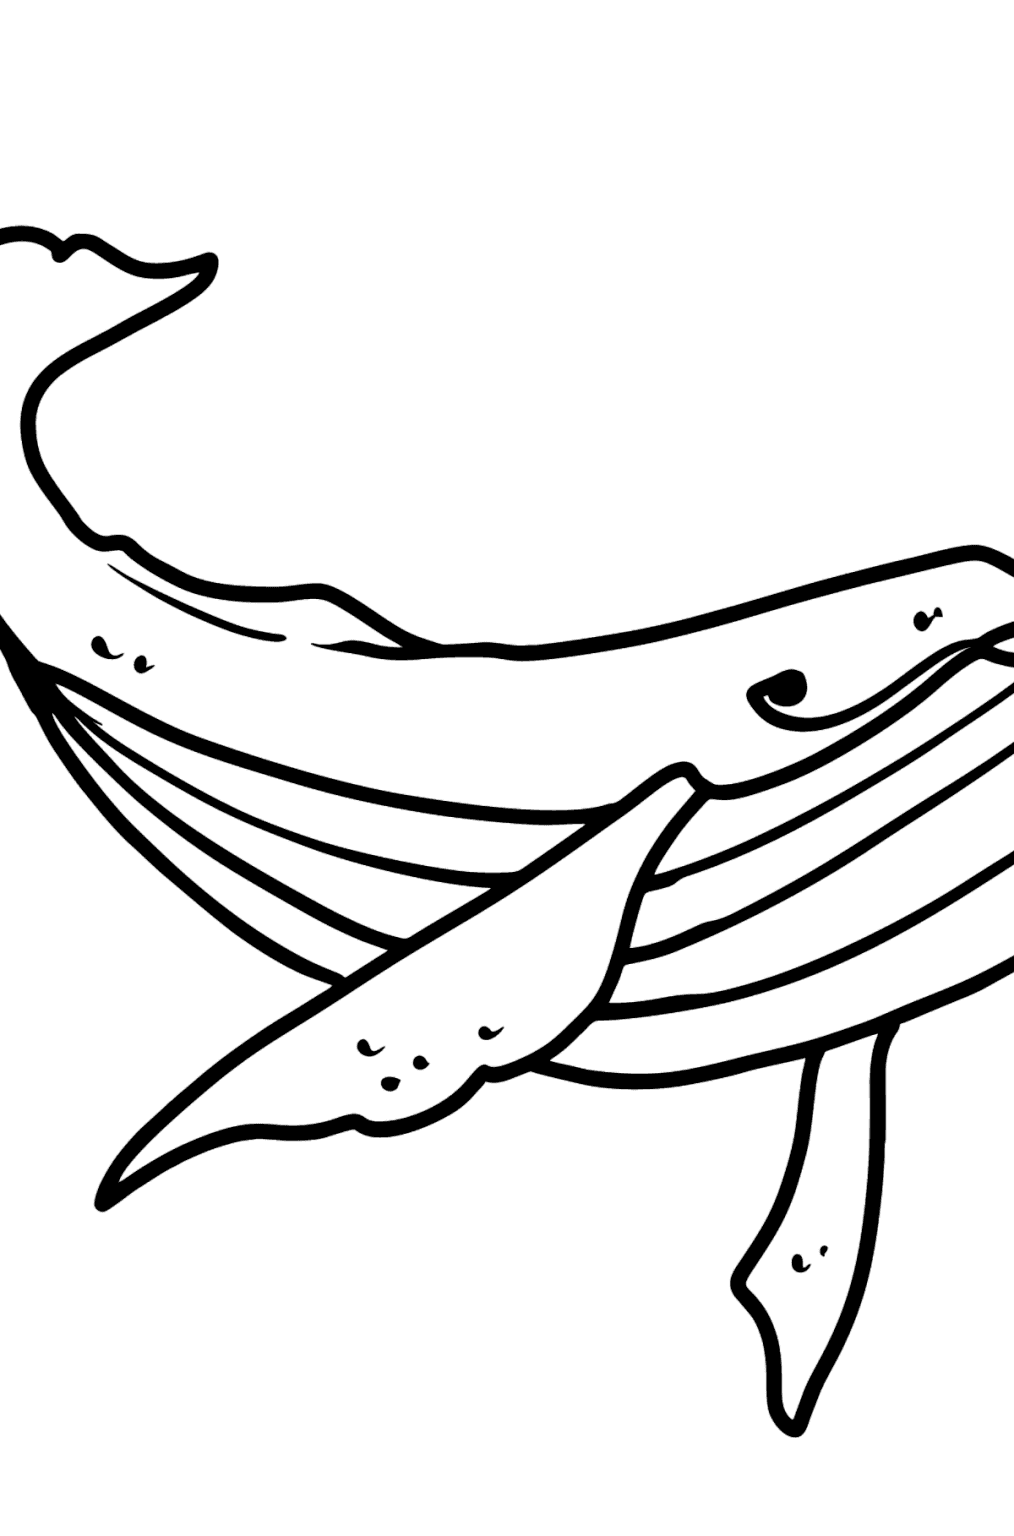 Humpback Whale coloring page - Online or Printable for Free!